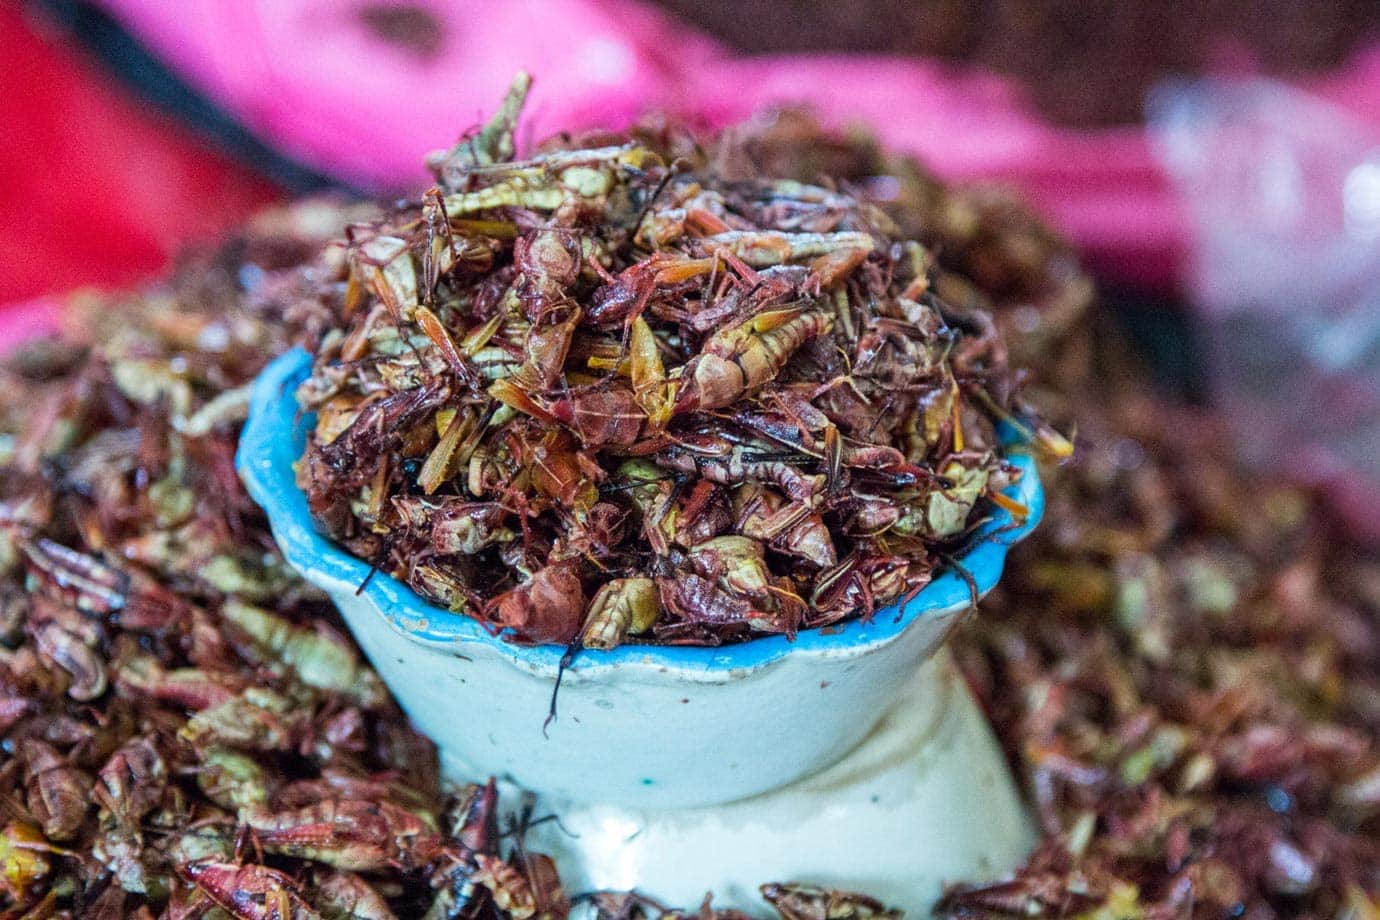 Fried crickets are just one delicacy in Oaxaca